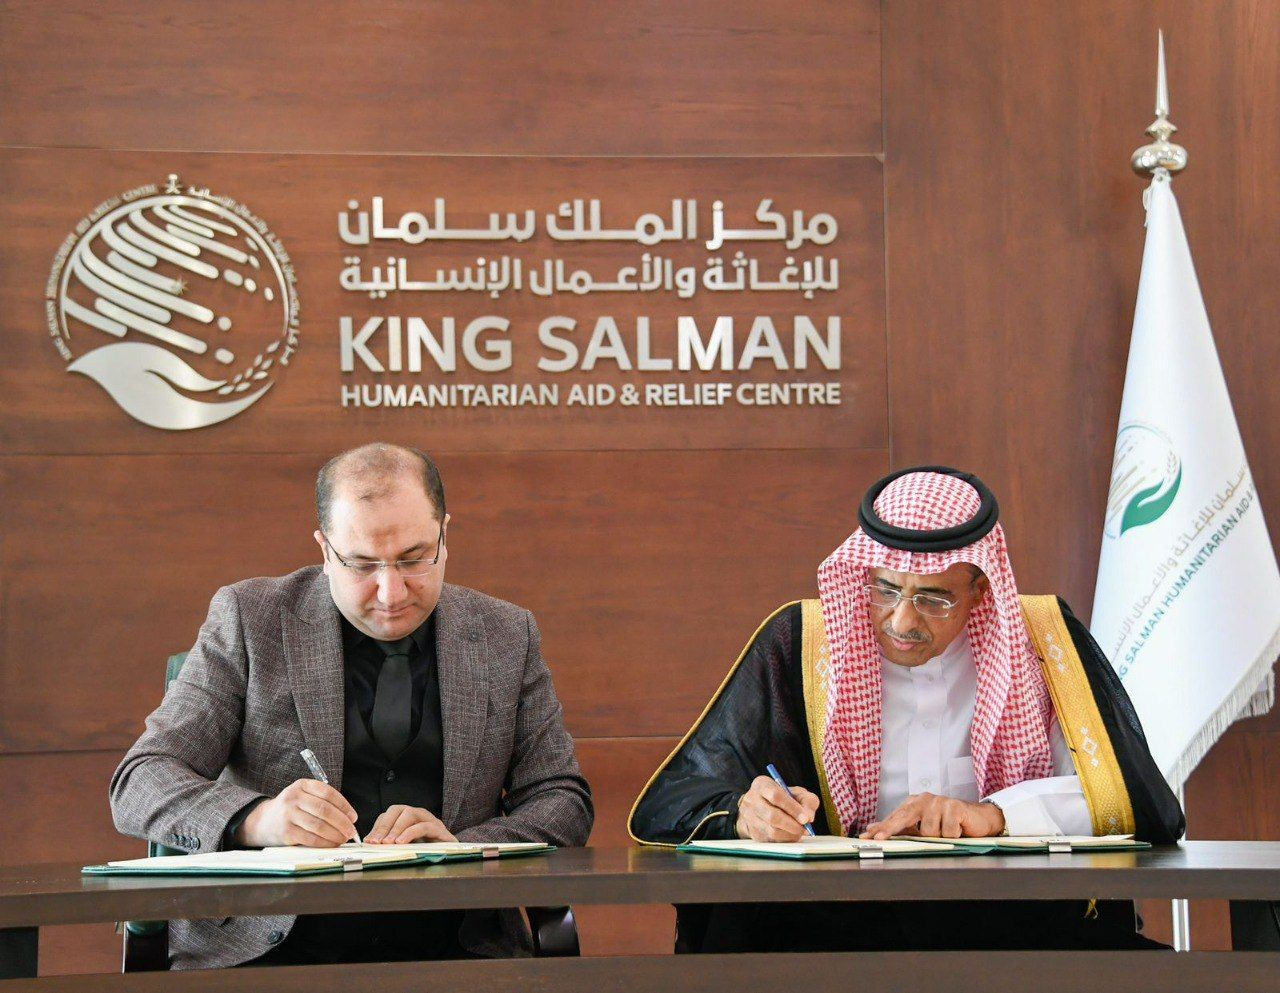 KSrelief Signs Agreement to Operate Prosthetics and Rehabilitation Center in Hadhramout